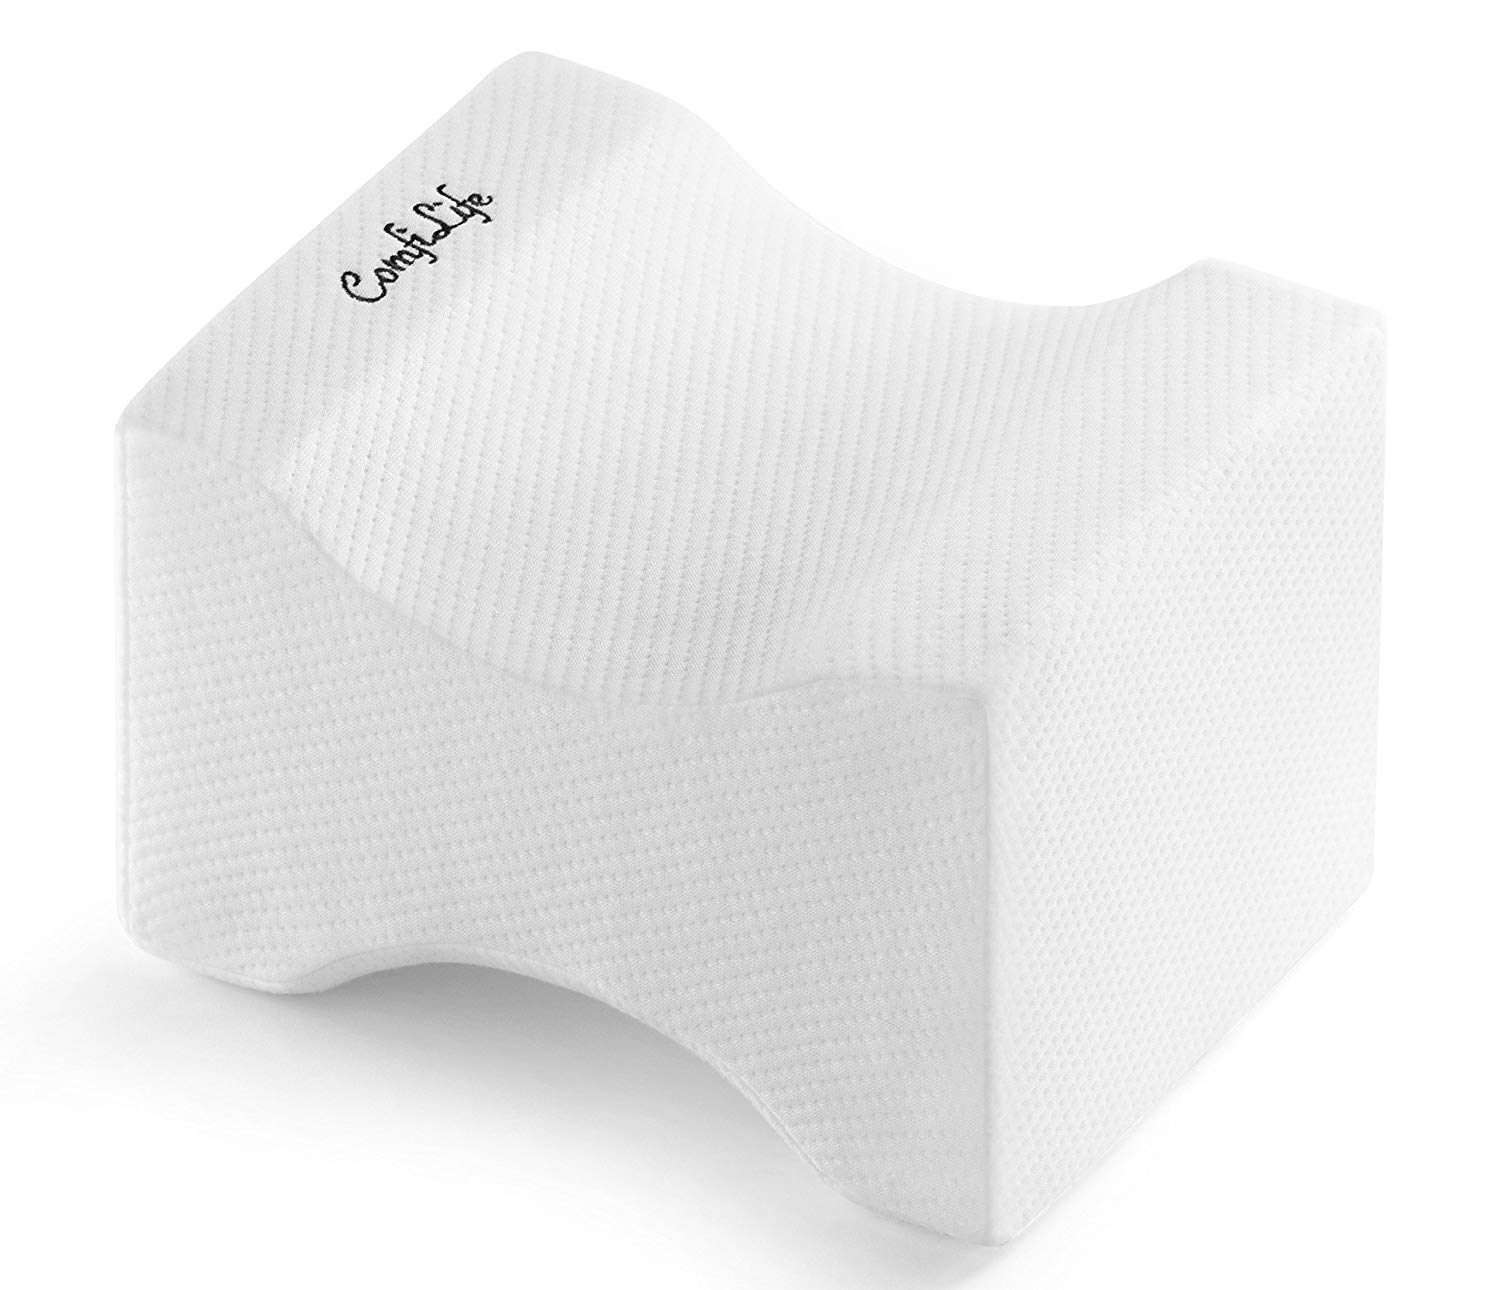 Knee pillow to relieve chronic pain when sleeping.